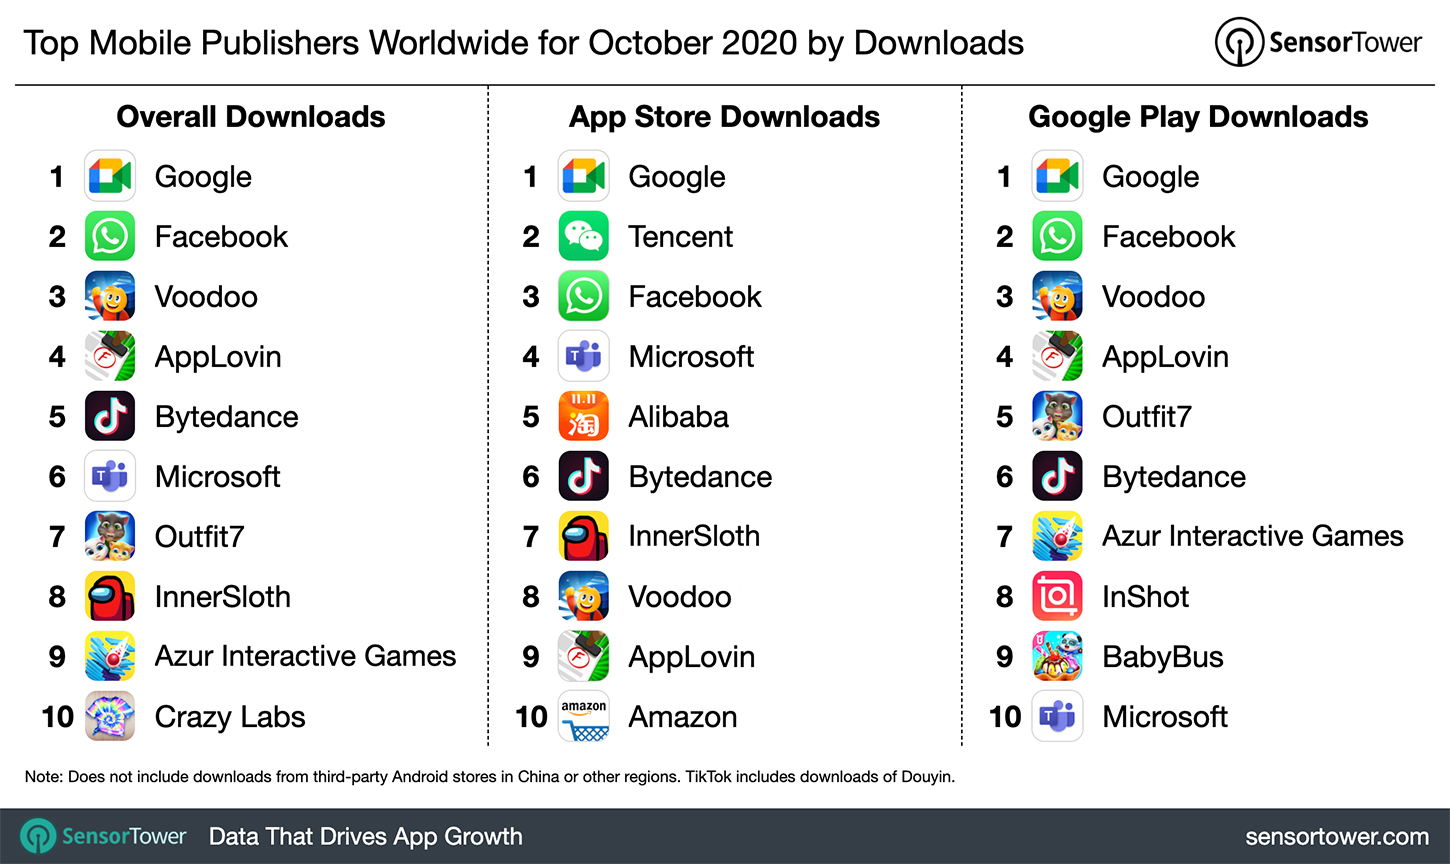 Top Mobile Publishers Worldwide for October 2020 by Downloads